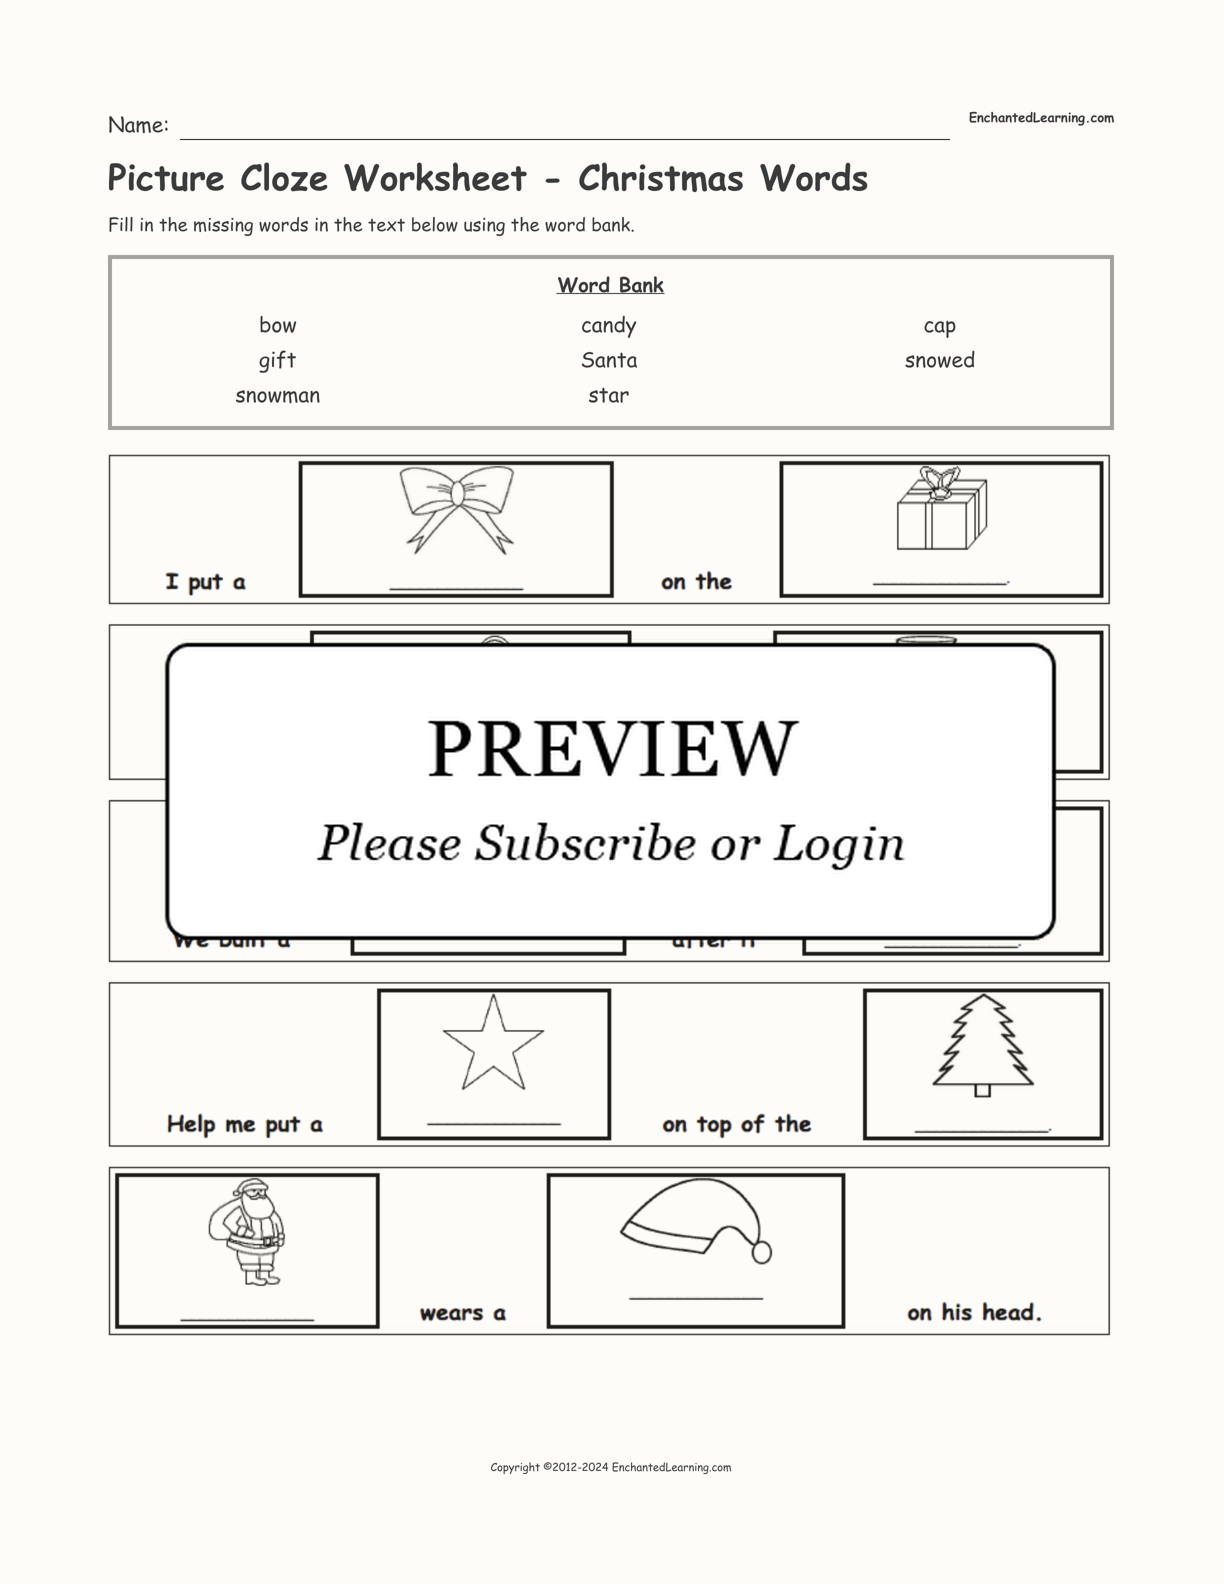 Picture Cloze Worksheet - Christmas Words interactive worksheet page 1